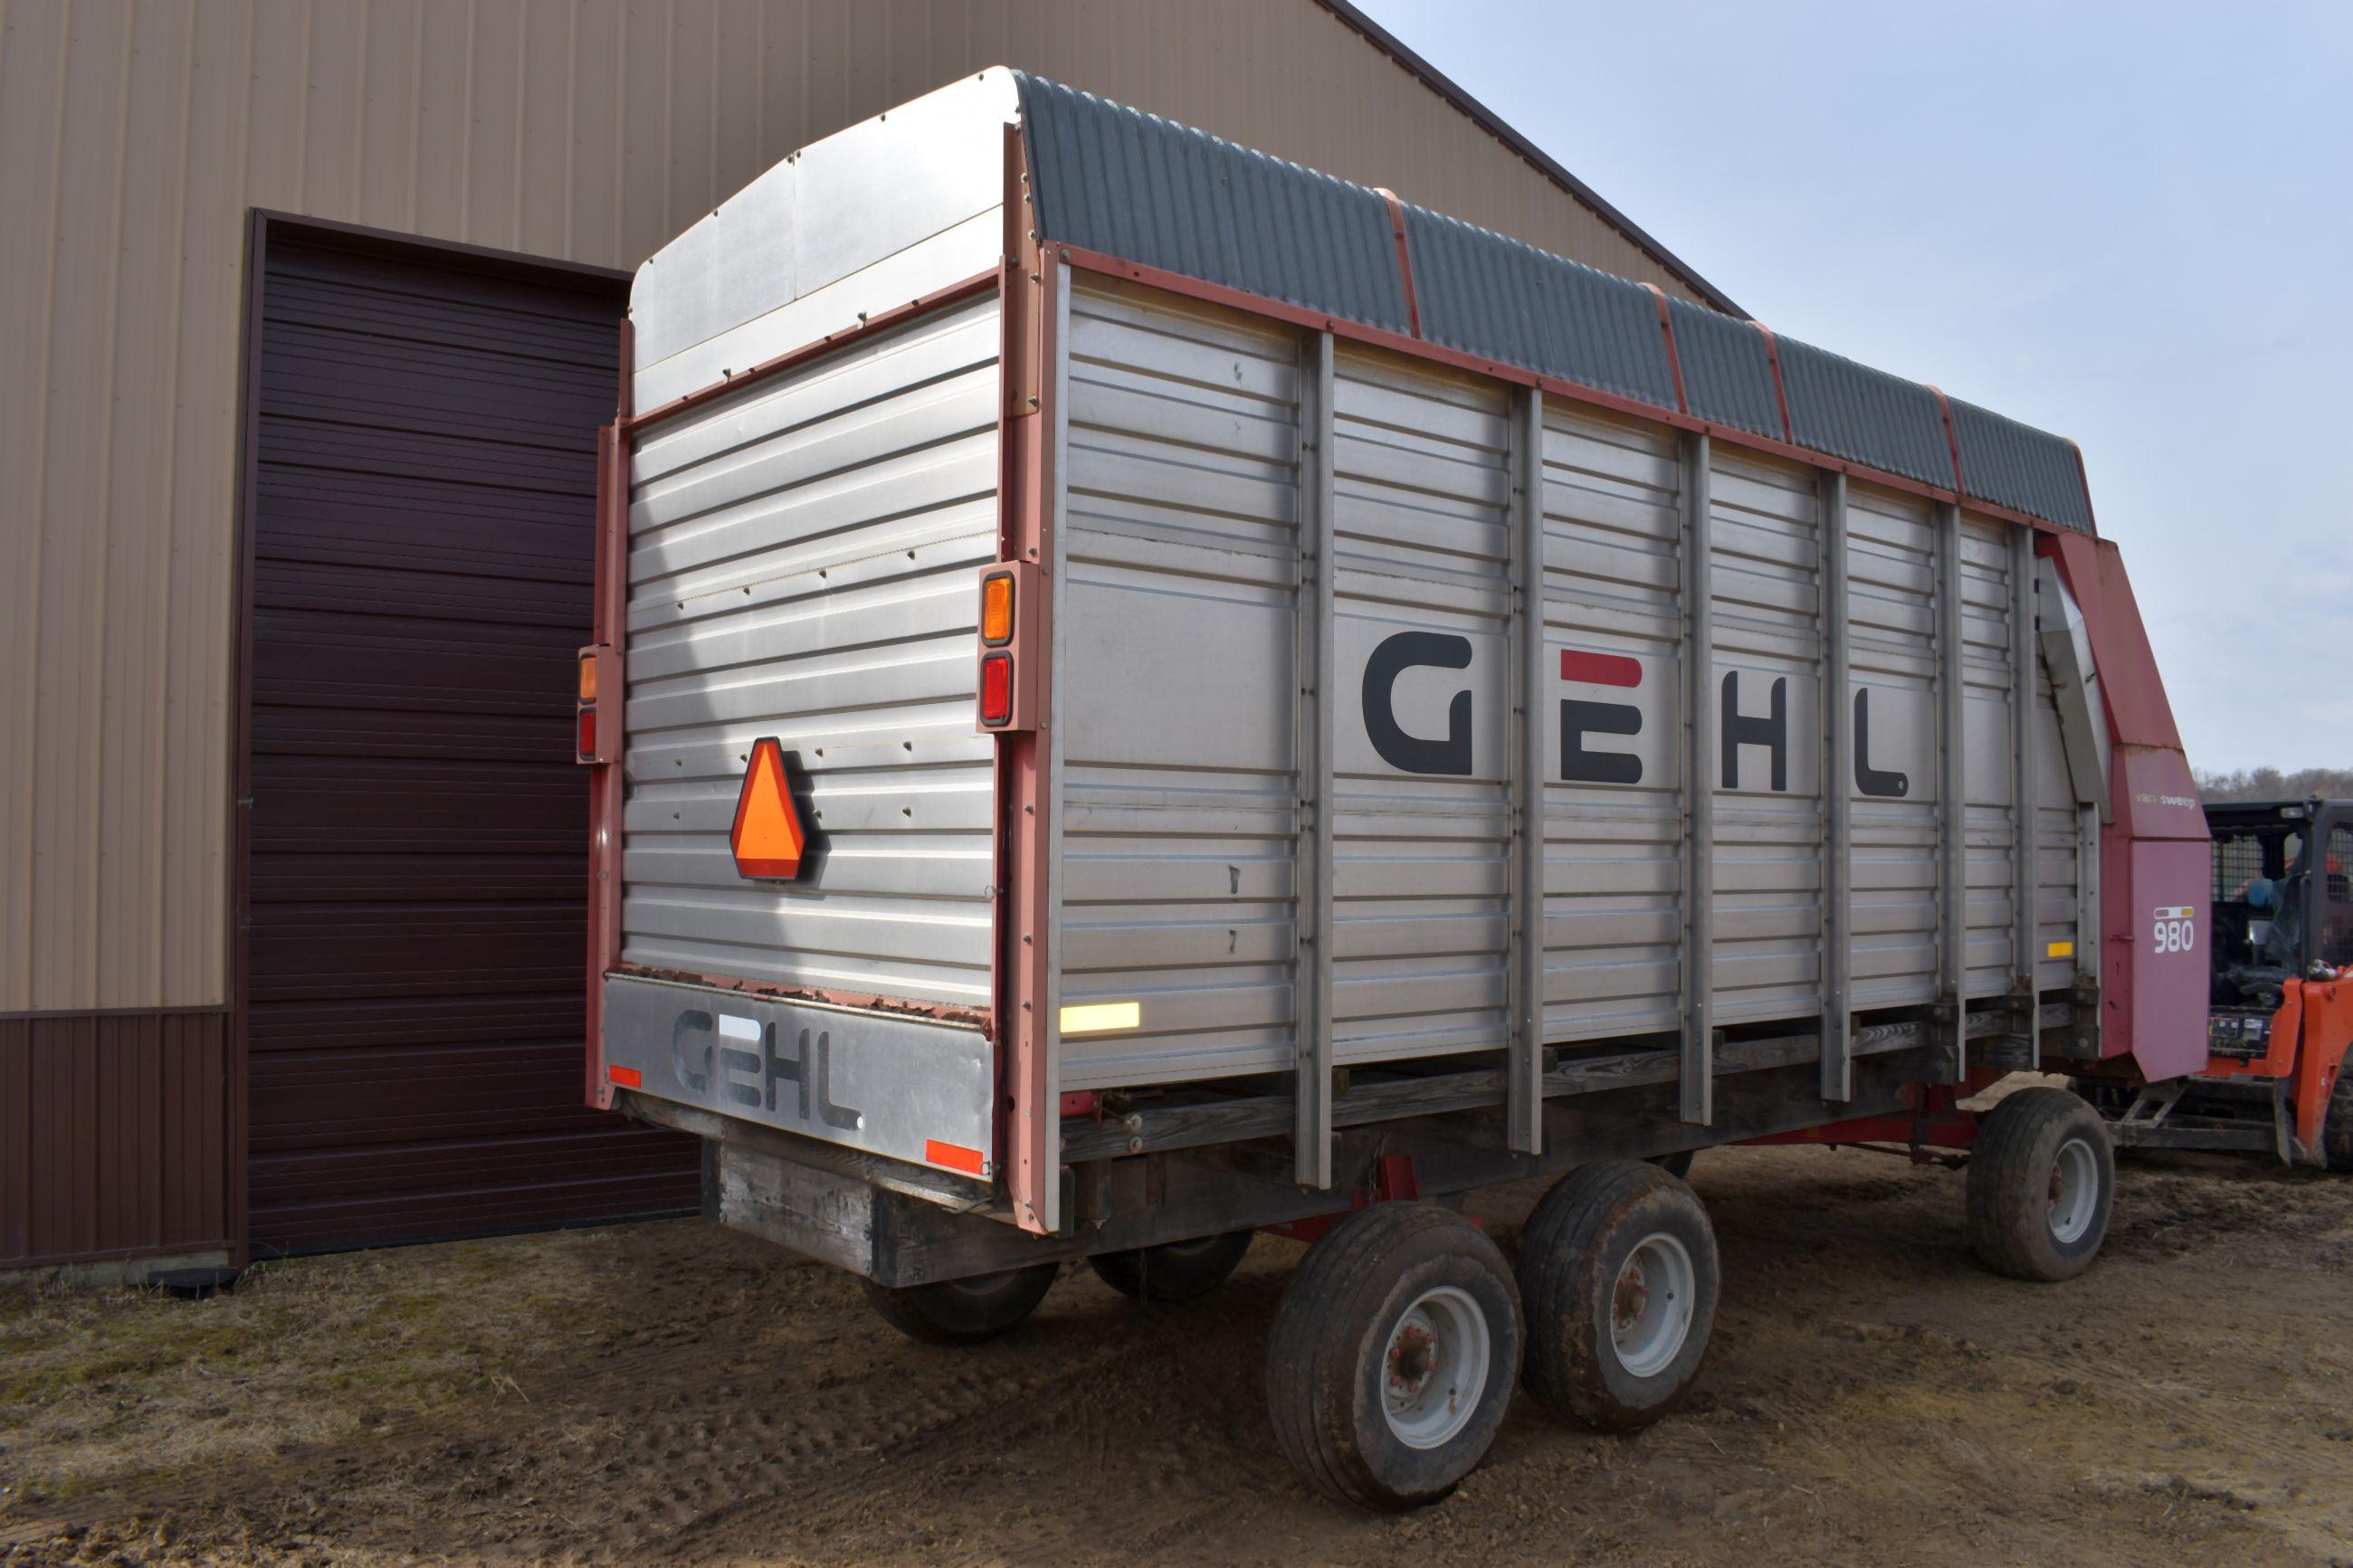 Gehl 980 18’ Forage Box, 3 Beater, Roof, 540PTO, 12.5x15 Tires, 12 Ton Tandem Running Gear, SN: 5264